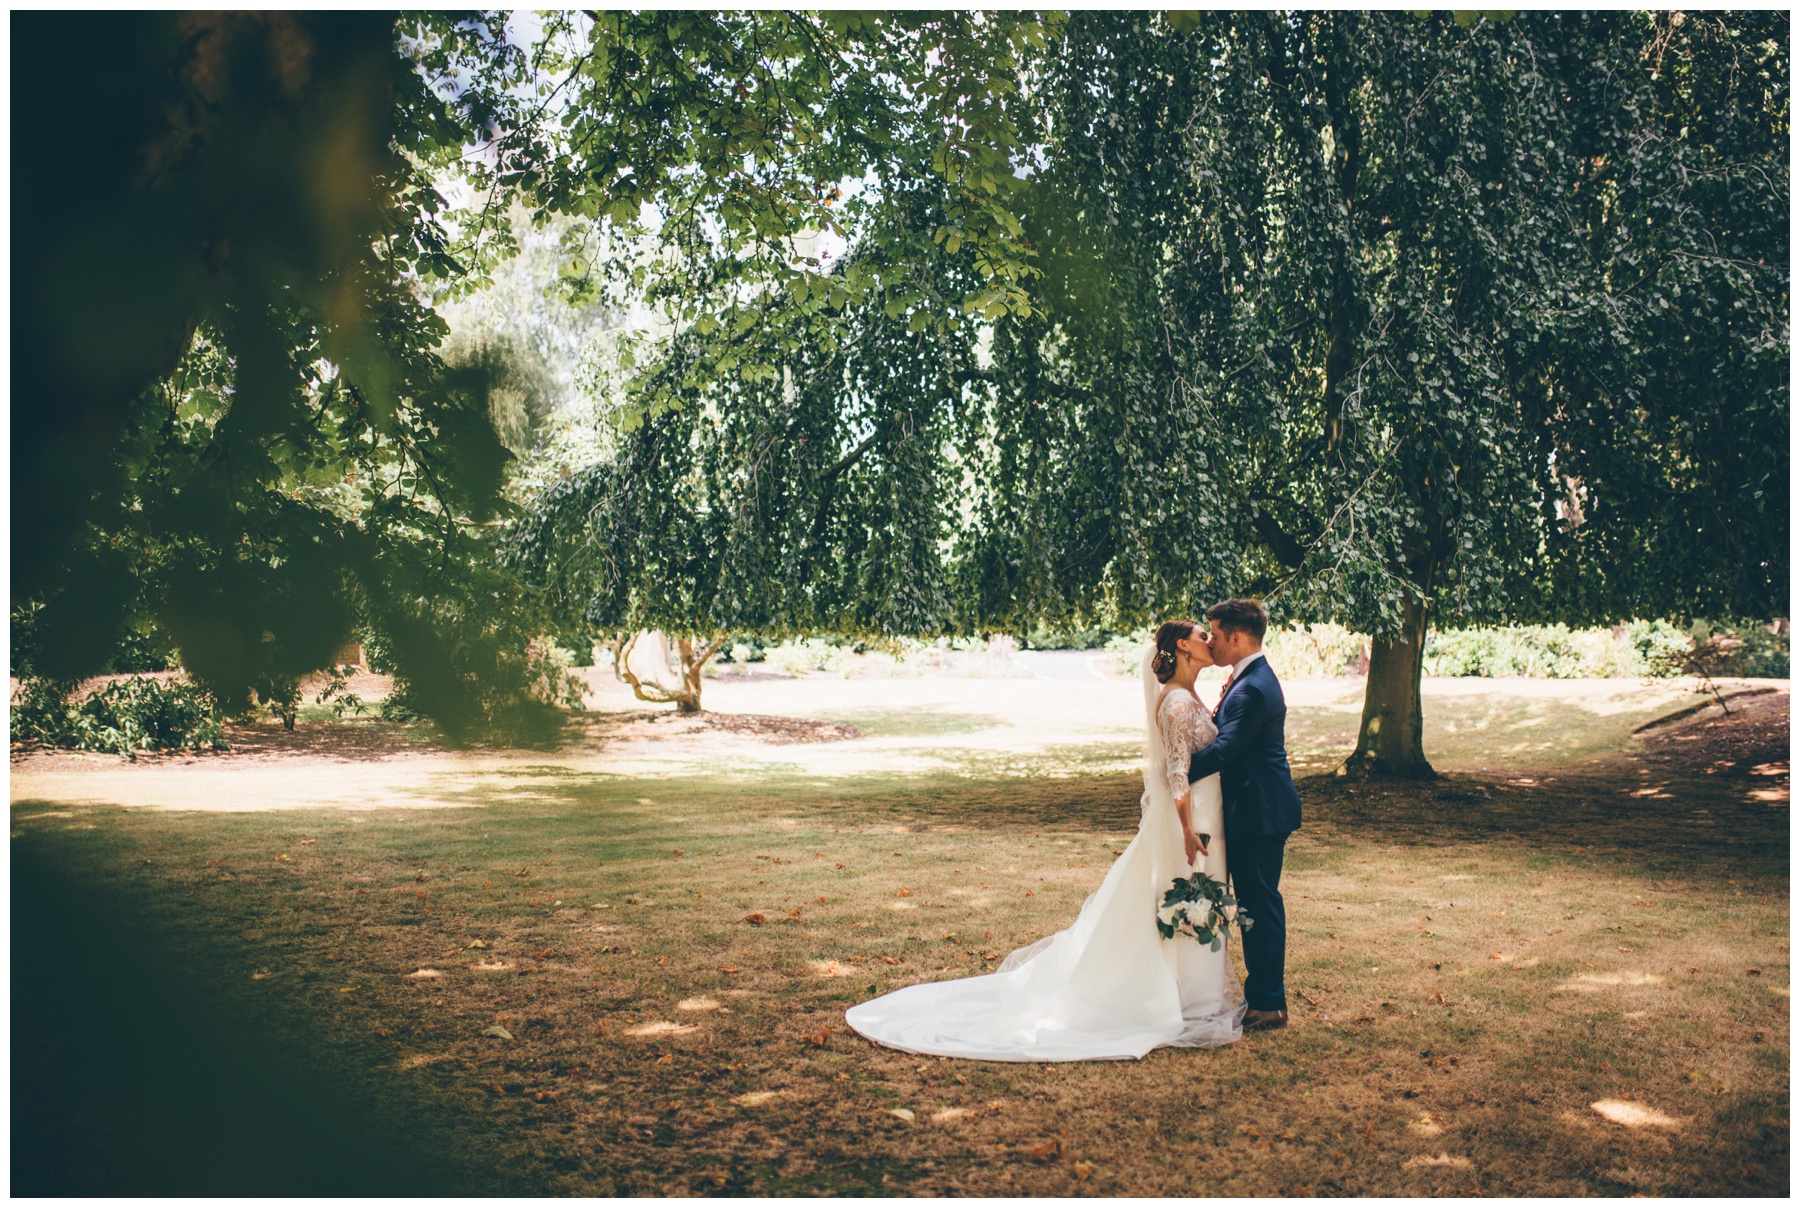 Beautiful bride and groom in the grounds at Tilstone House in Cheshire.